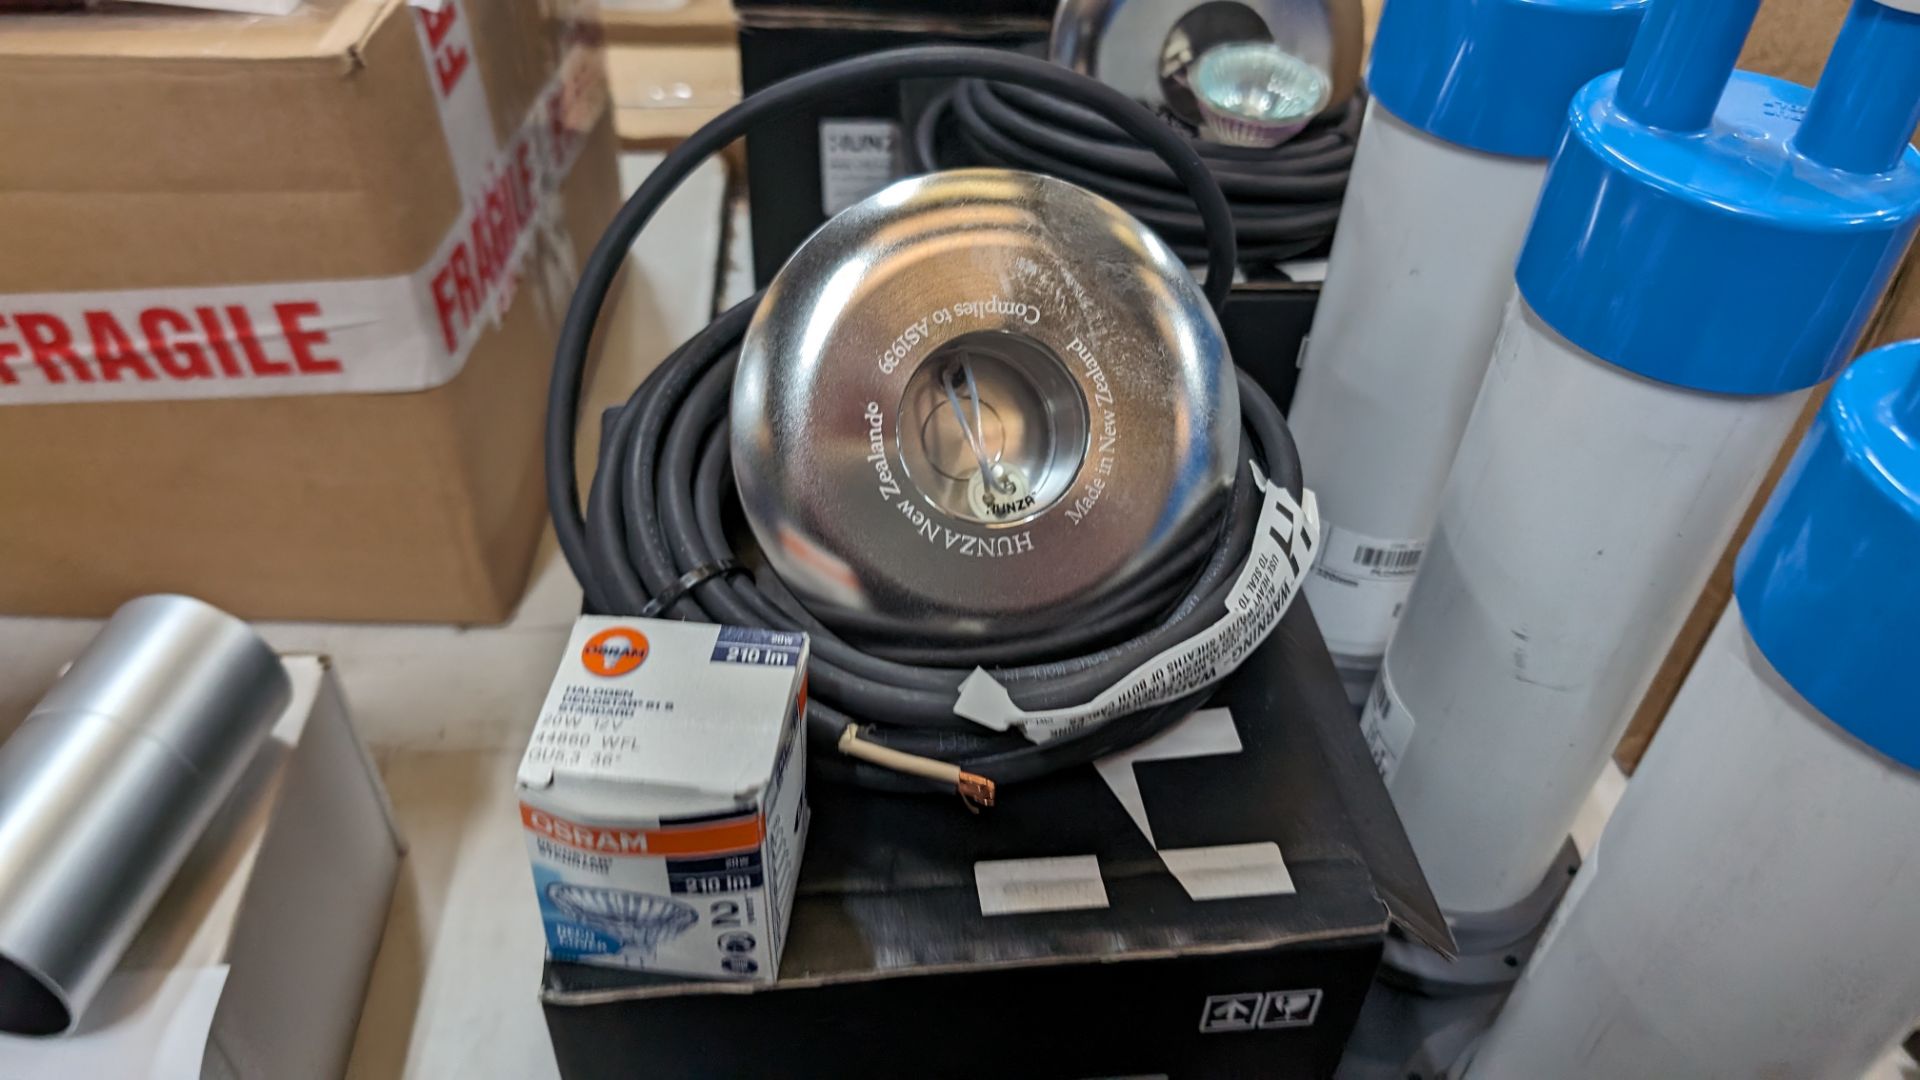 5 off Hunza stainless steel pool lights, including 5 off Hunza and other pool light canisters - Image 6 of 12